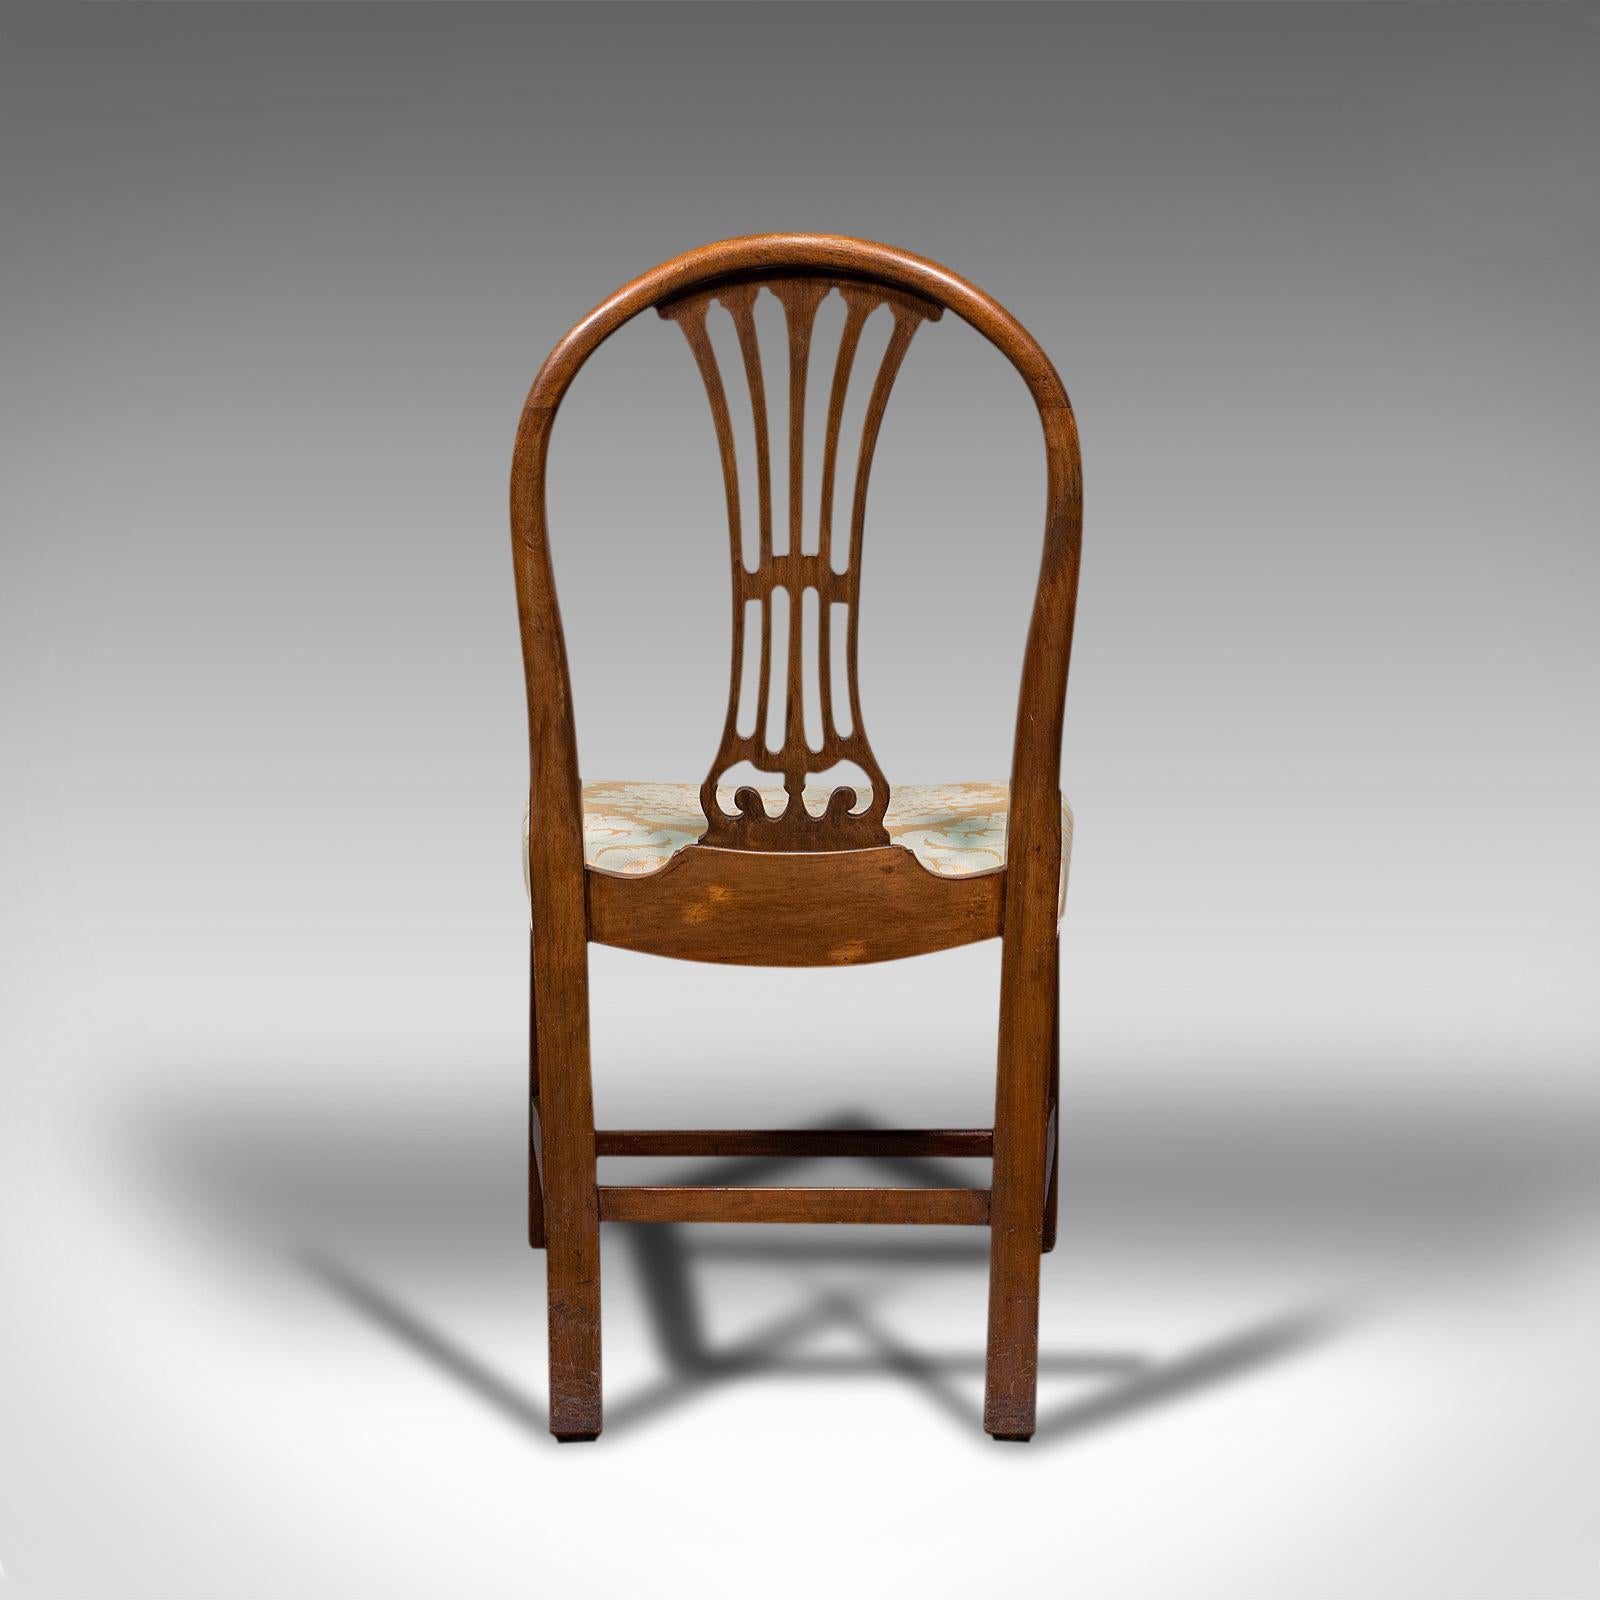 19th Century Set of 4 Hepplewhite Revival Chairs, English, Mahogany, Dining Suite, Victorian